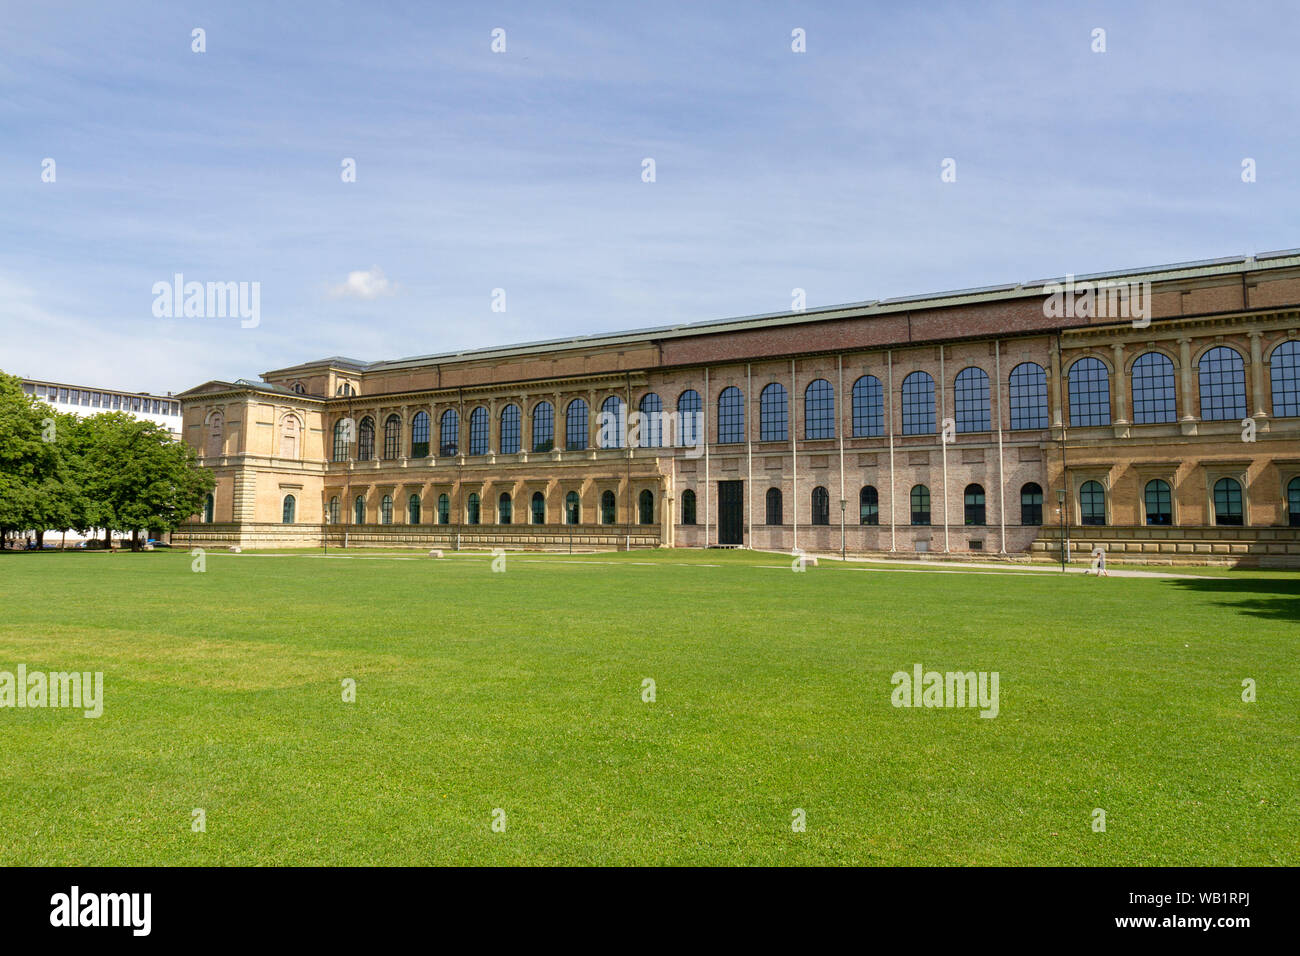 South west facing facade of the Alte Pinakothek, Munich, Bavaria, Germany. Stock Photo